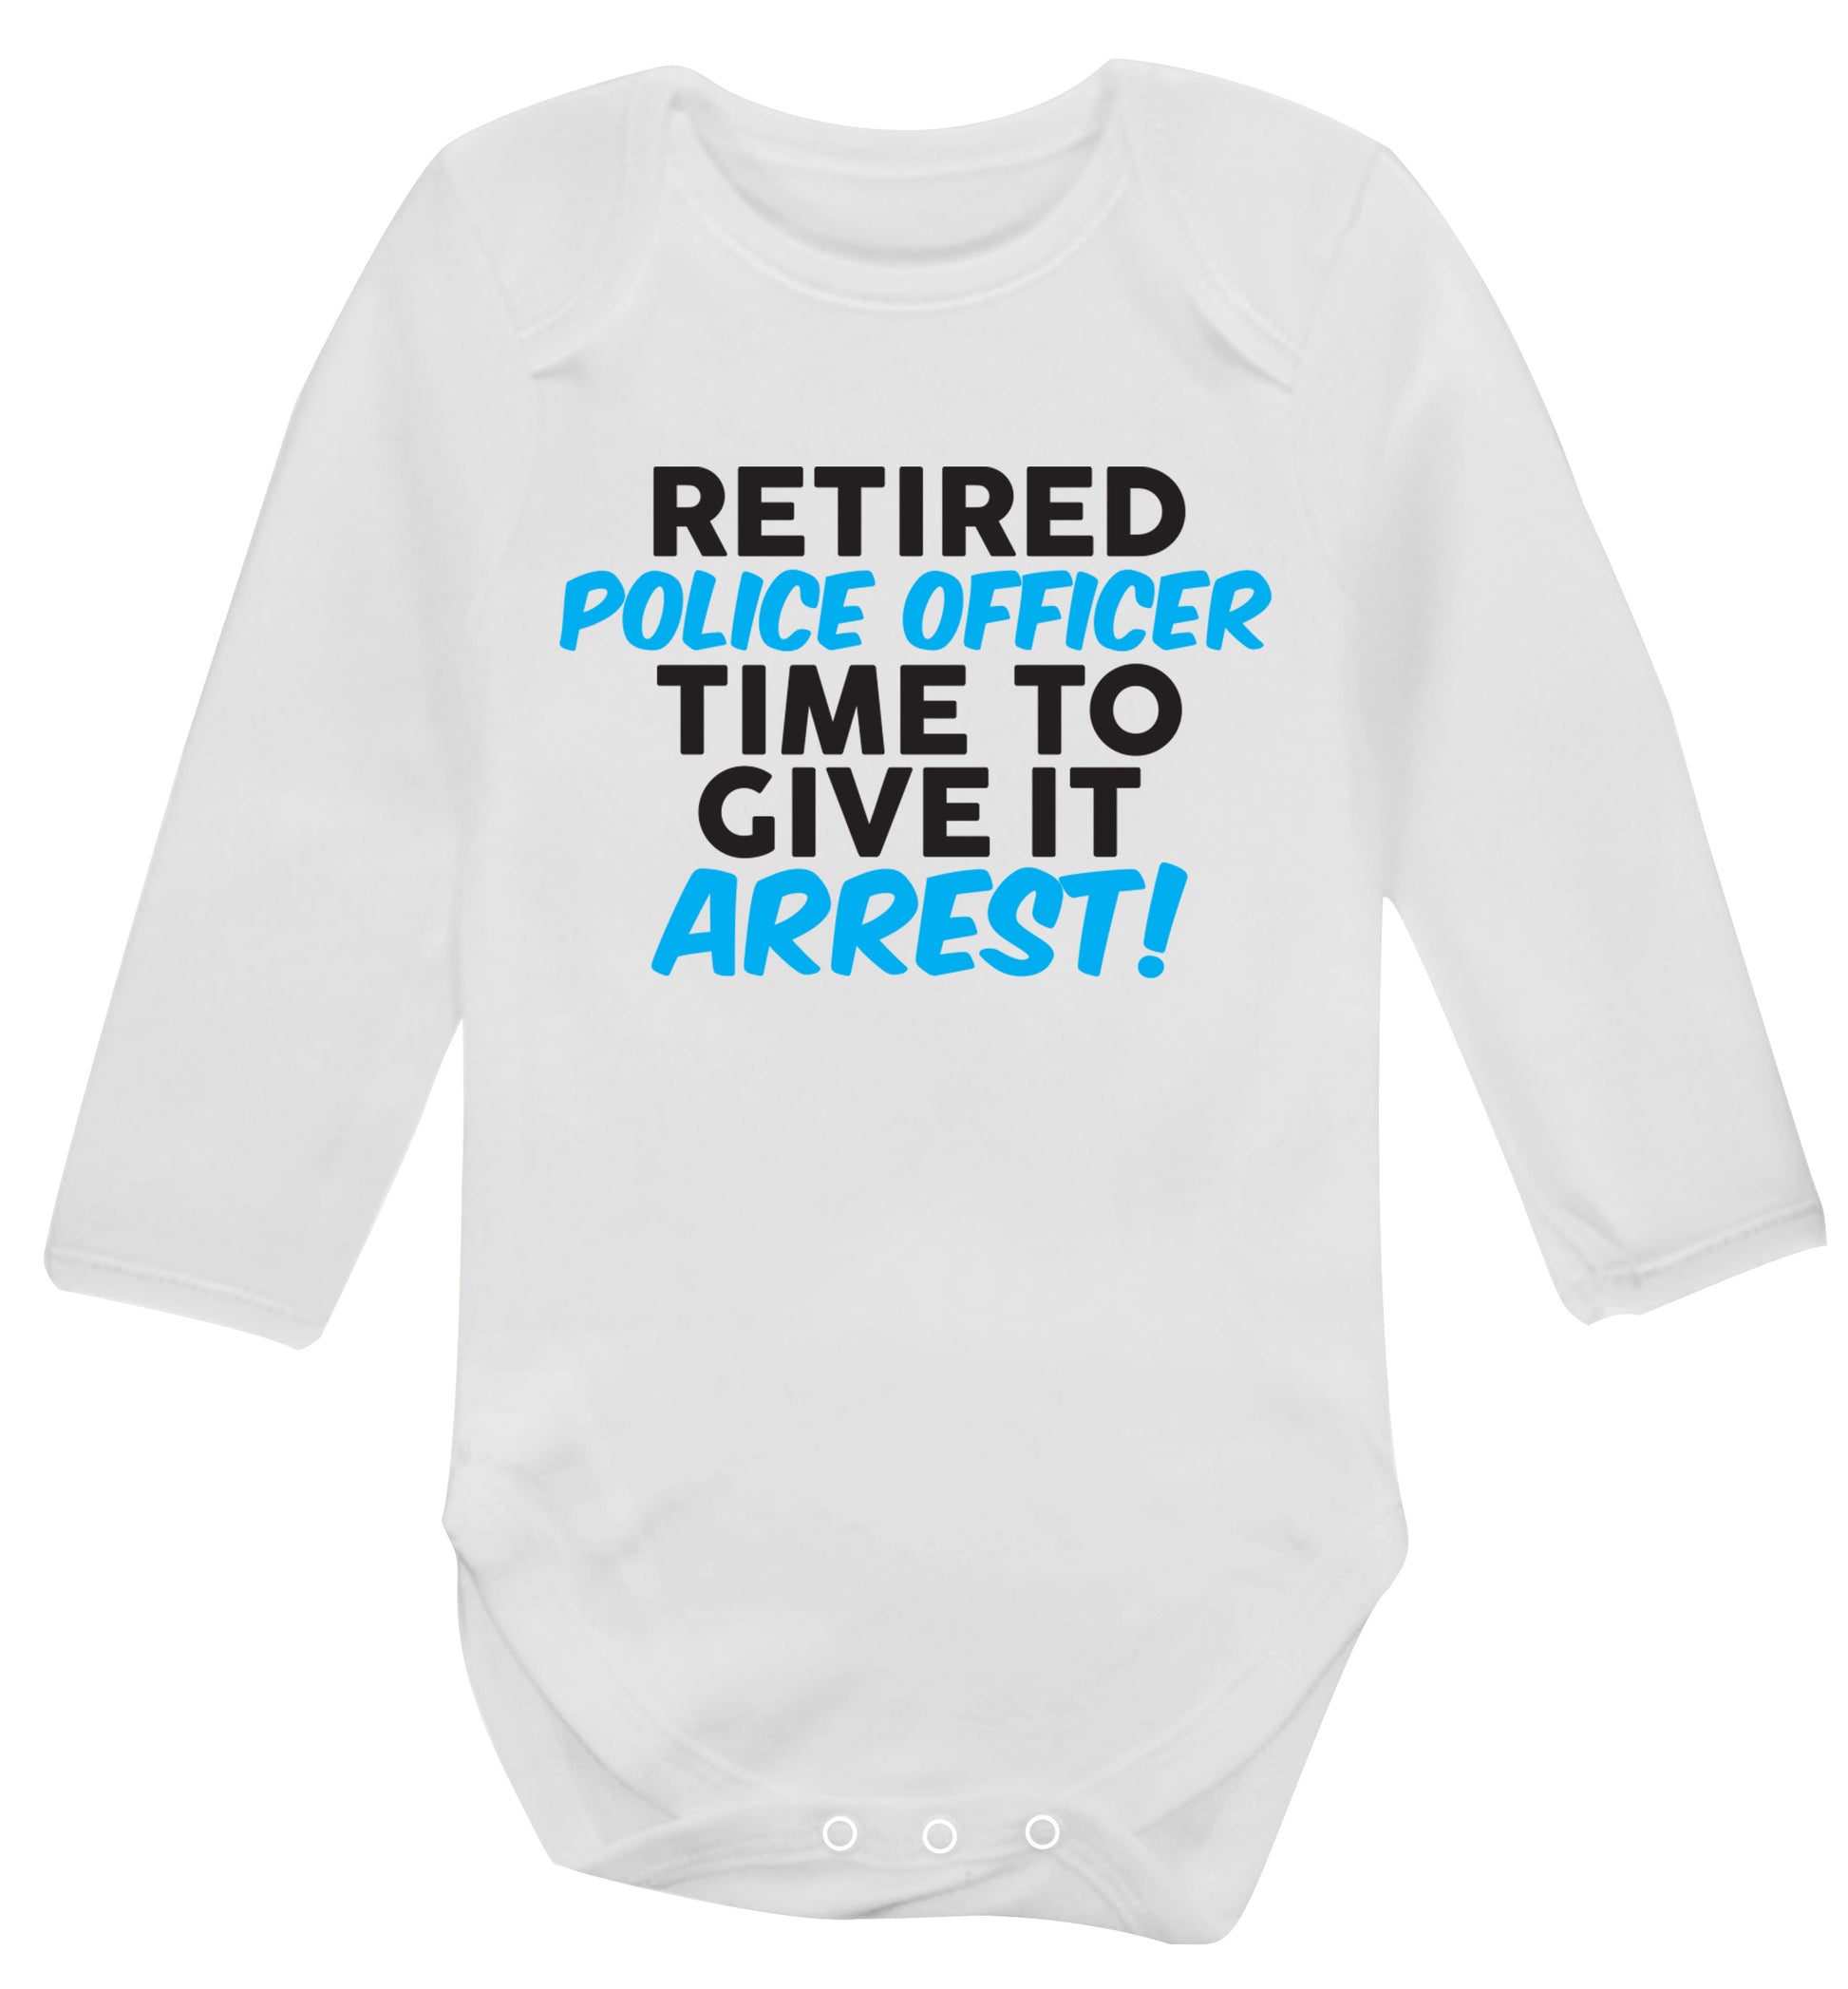 Retired police officer time to give it arrest Baby Vest long sleeved white 6-12 months